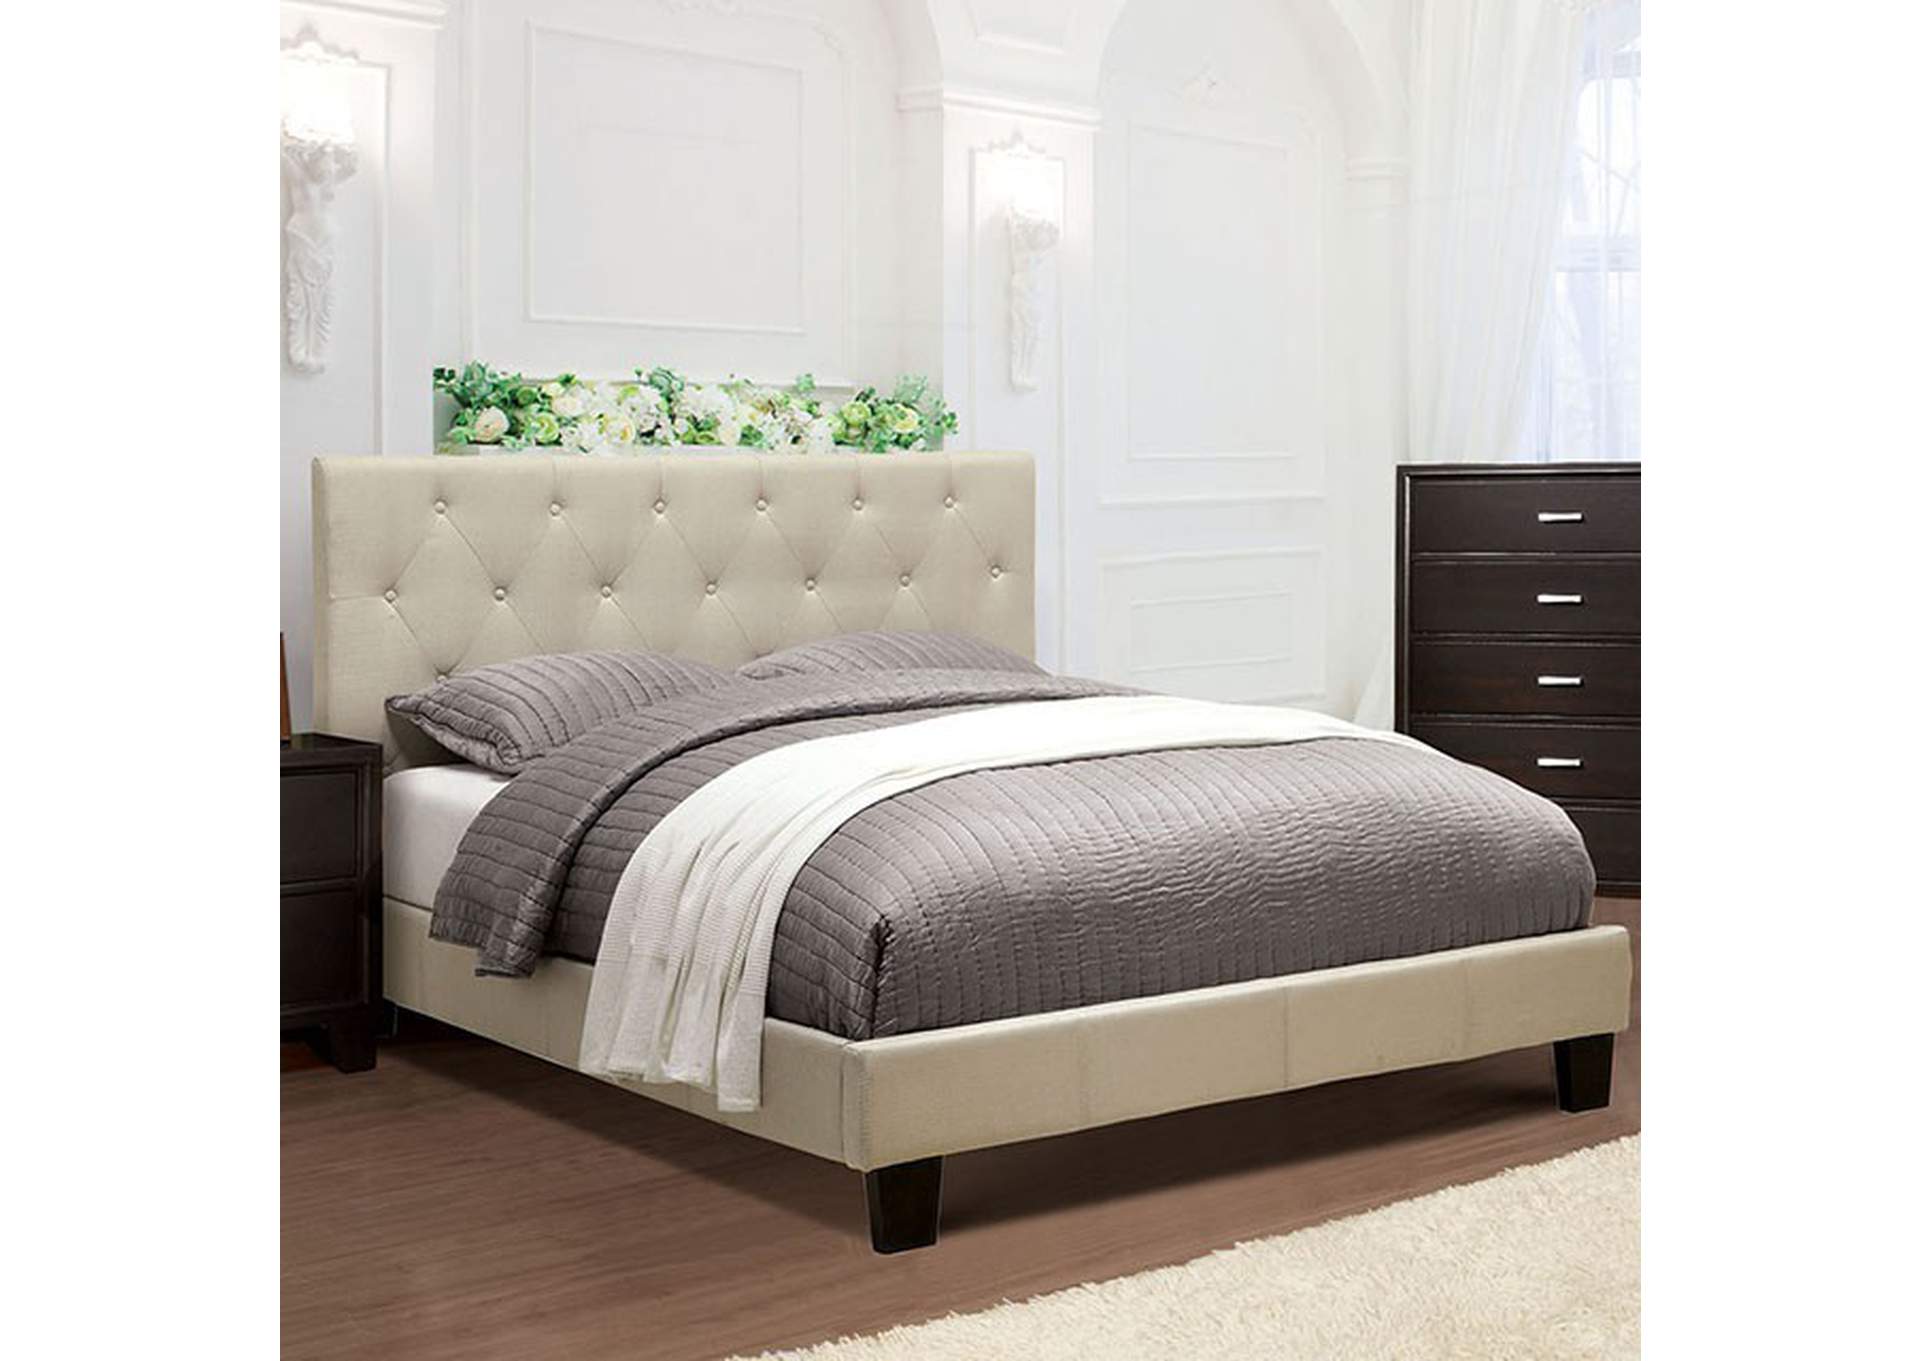 Leeroy Ivory California King Bed Best, Ivory King Bed